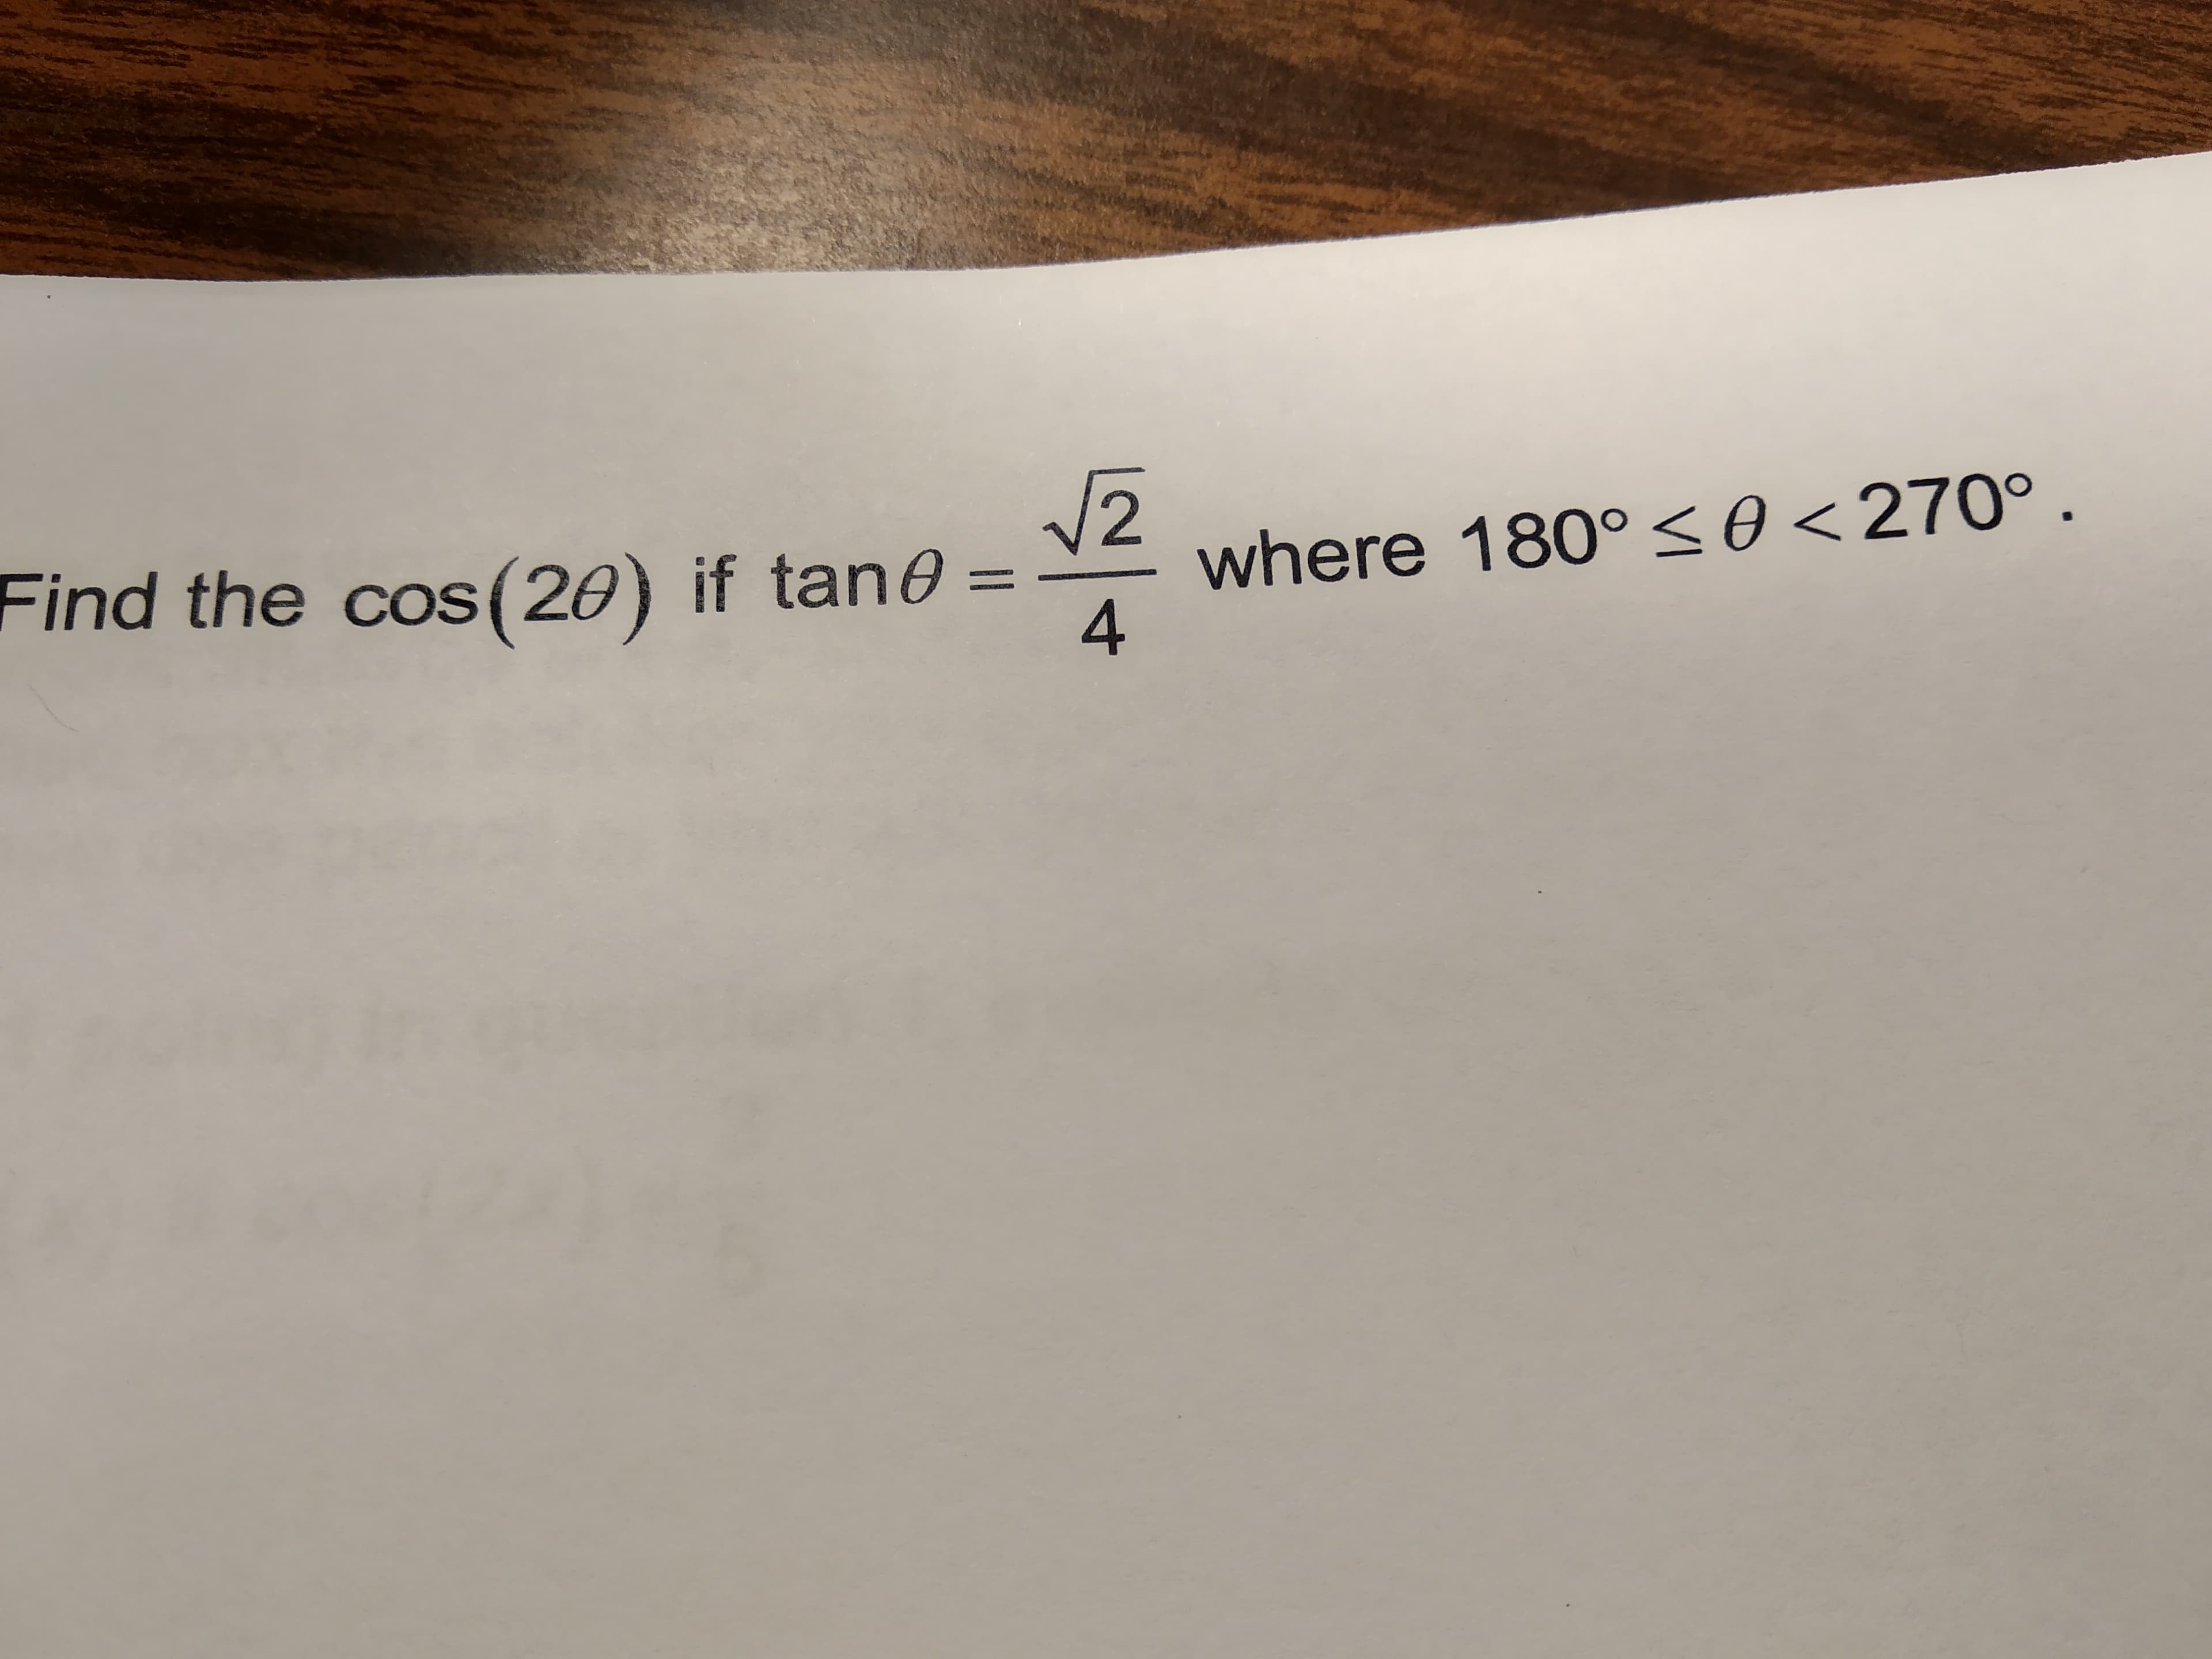 2
Find the cos(20) if tan9-_ where 180% θ <270
